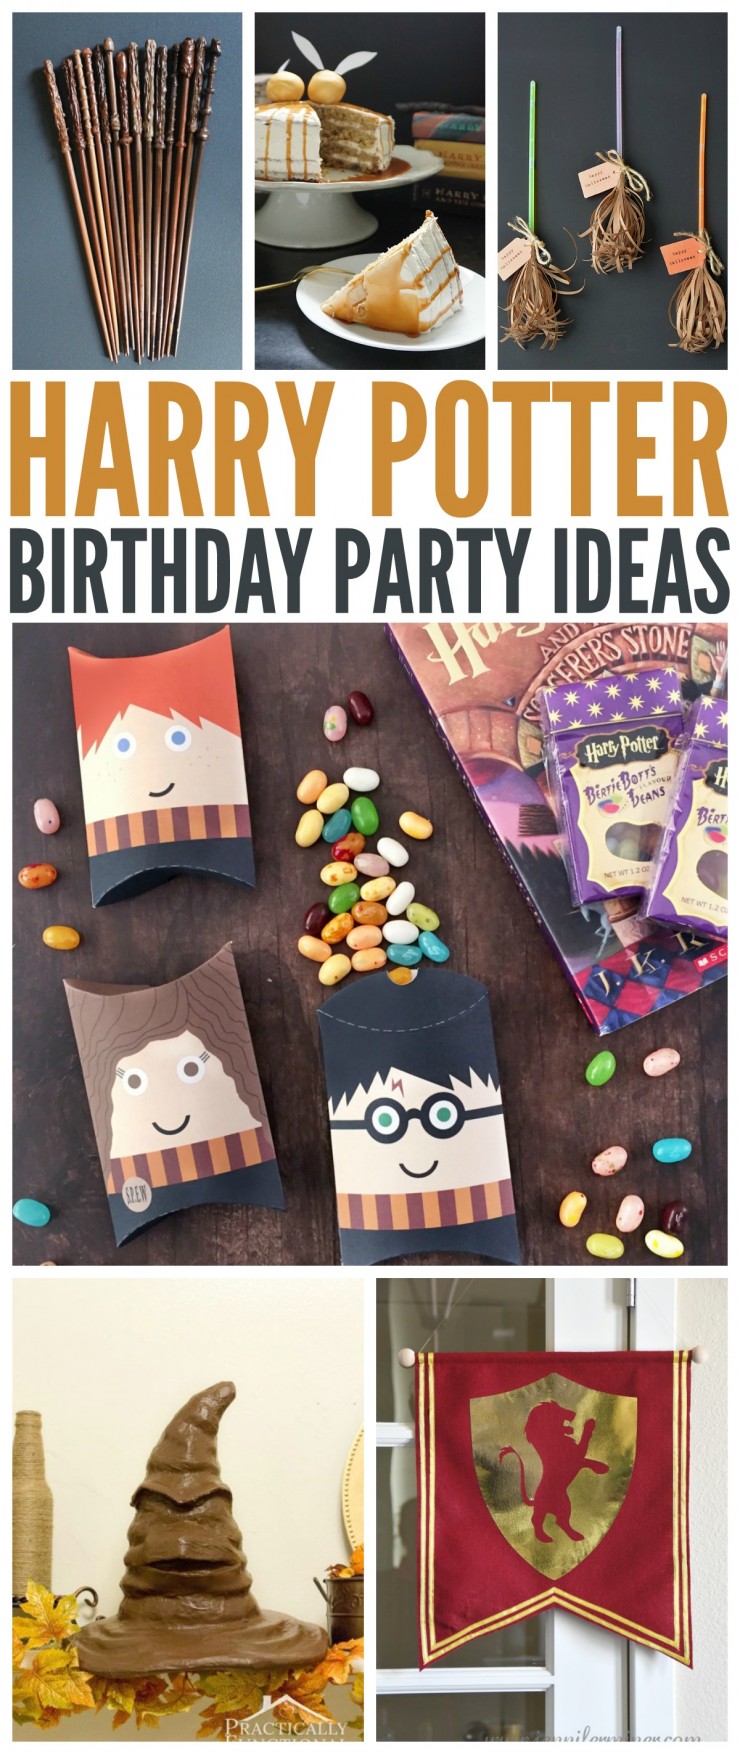 How to throw the Ultimate Harry Potter Birthday Party with these 25 fabulous Harry Potter party ideas.